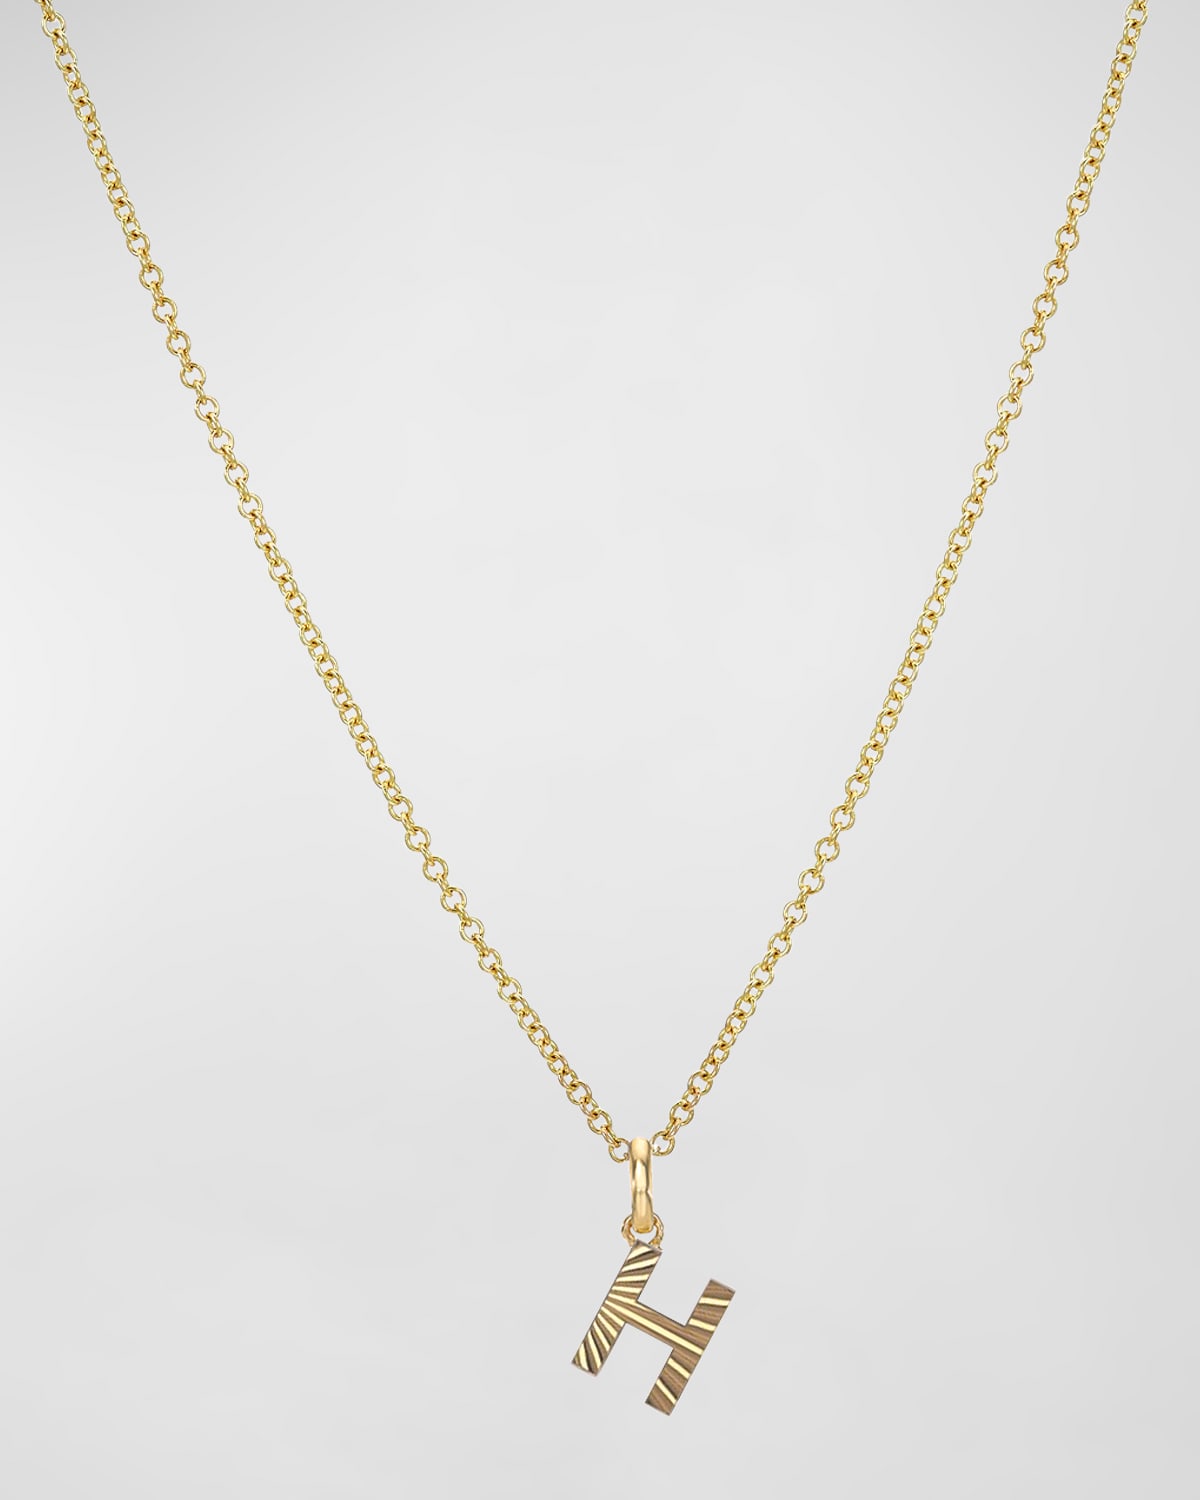 Zoe Lev Jewelry 14k Gold Initial Pendant Necklace In H